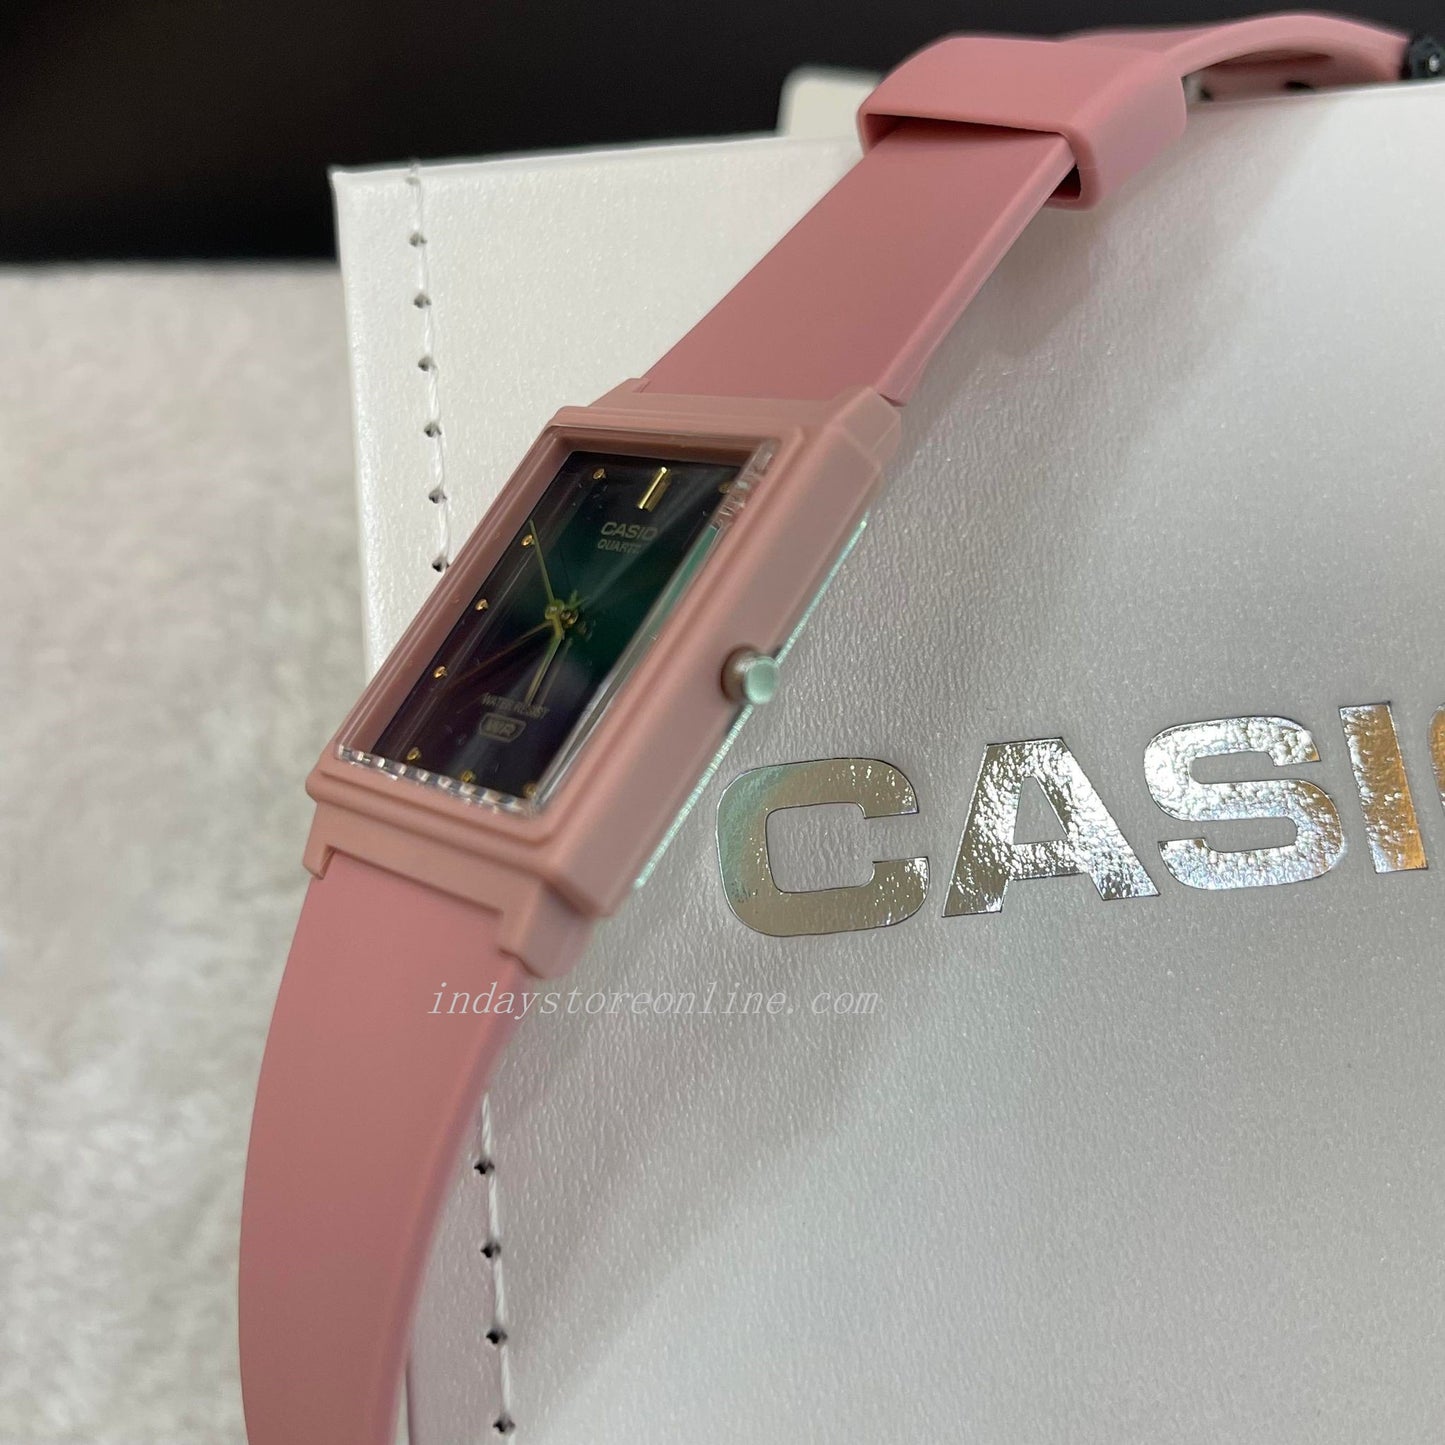 Casio Analog Women's Watch MQ-38UC-4A Resin Glass Pink Color Resin Strap Watch